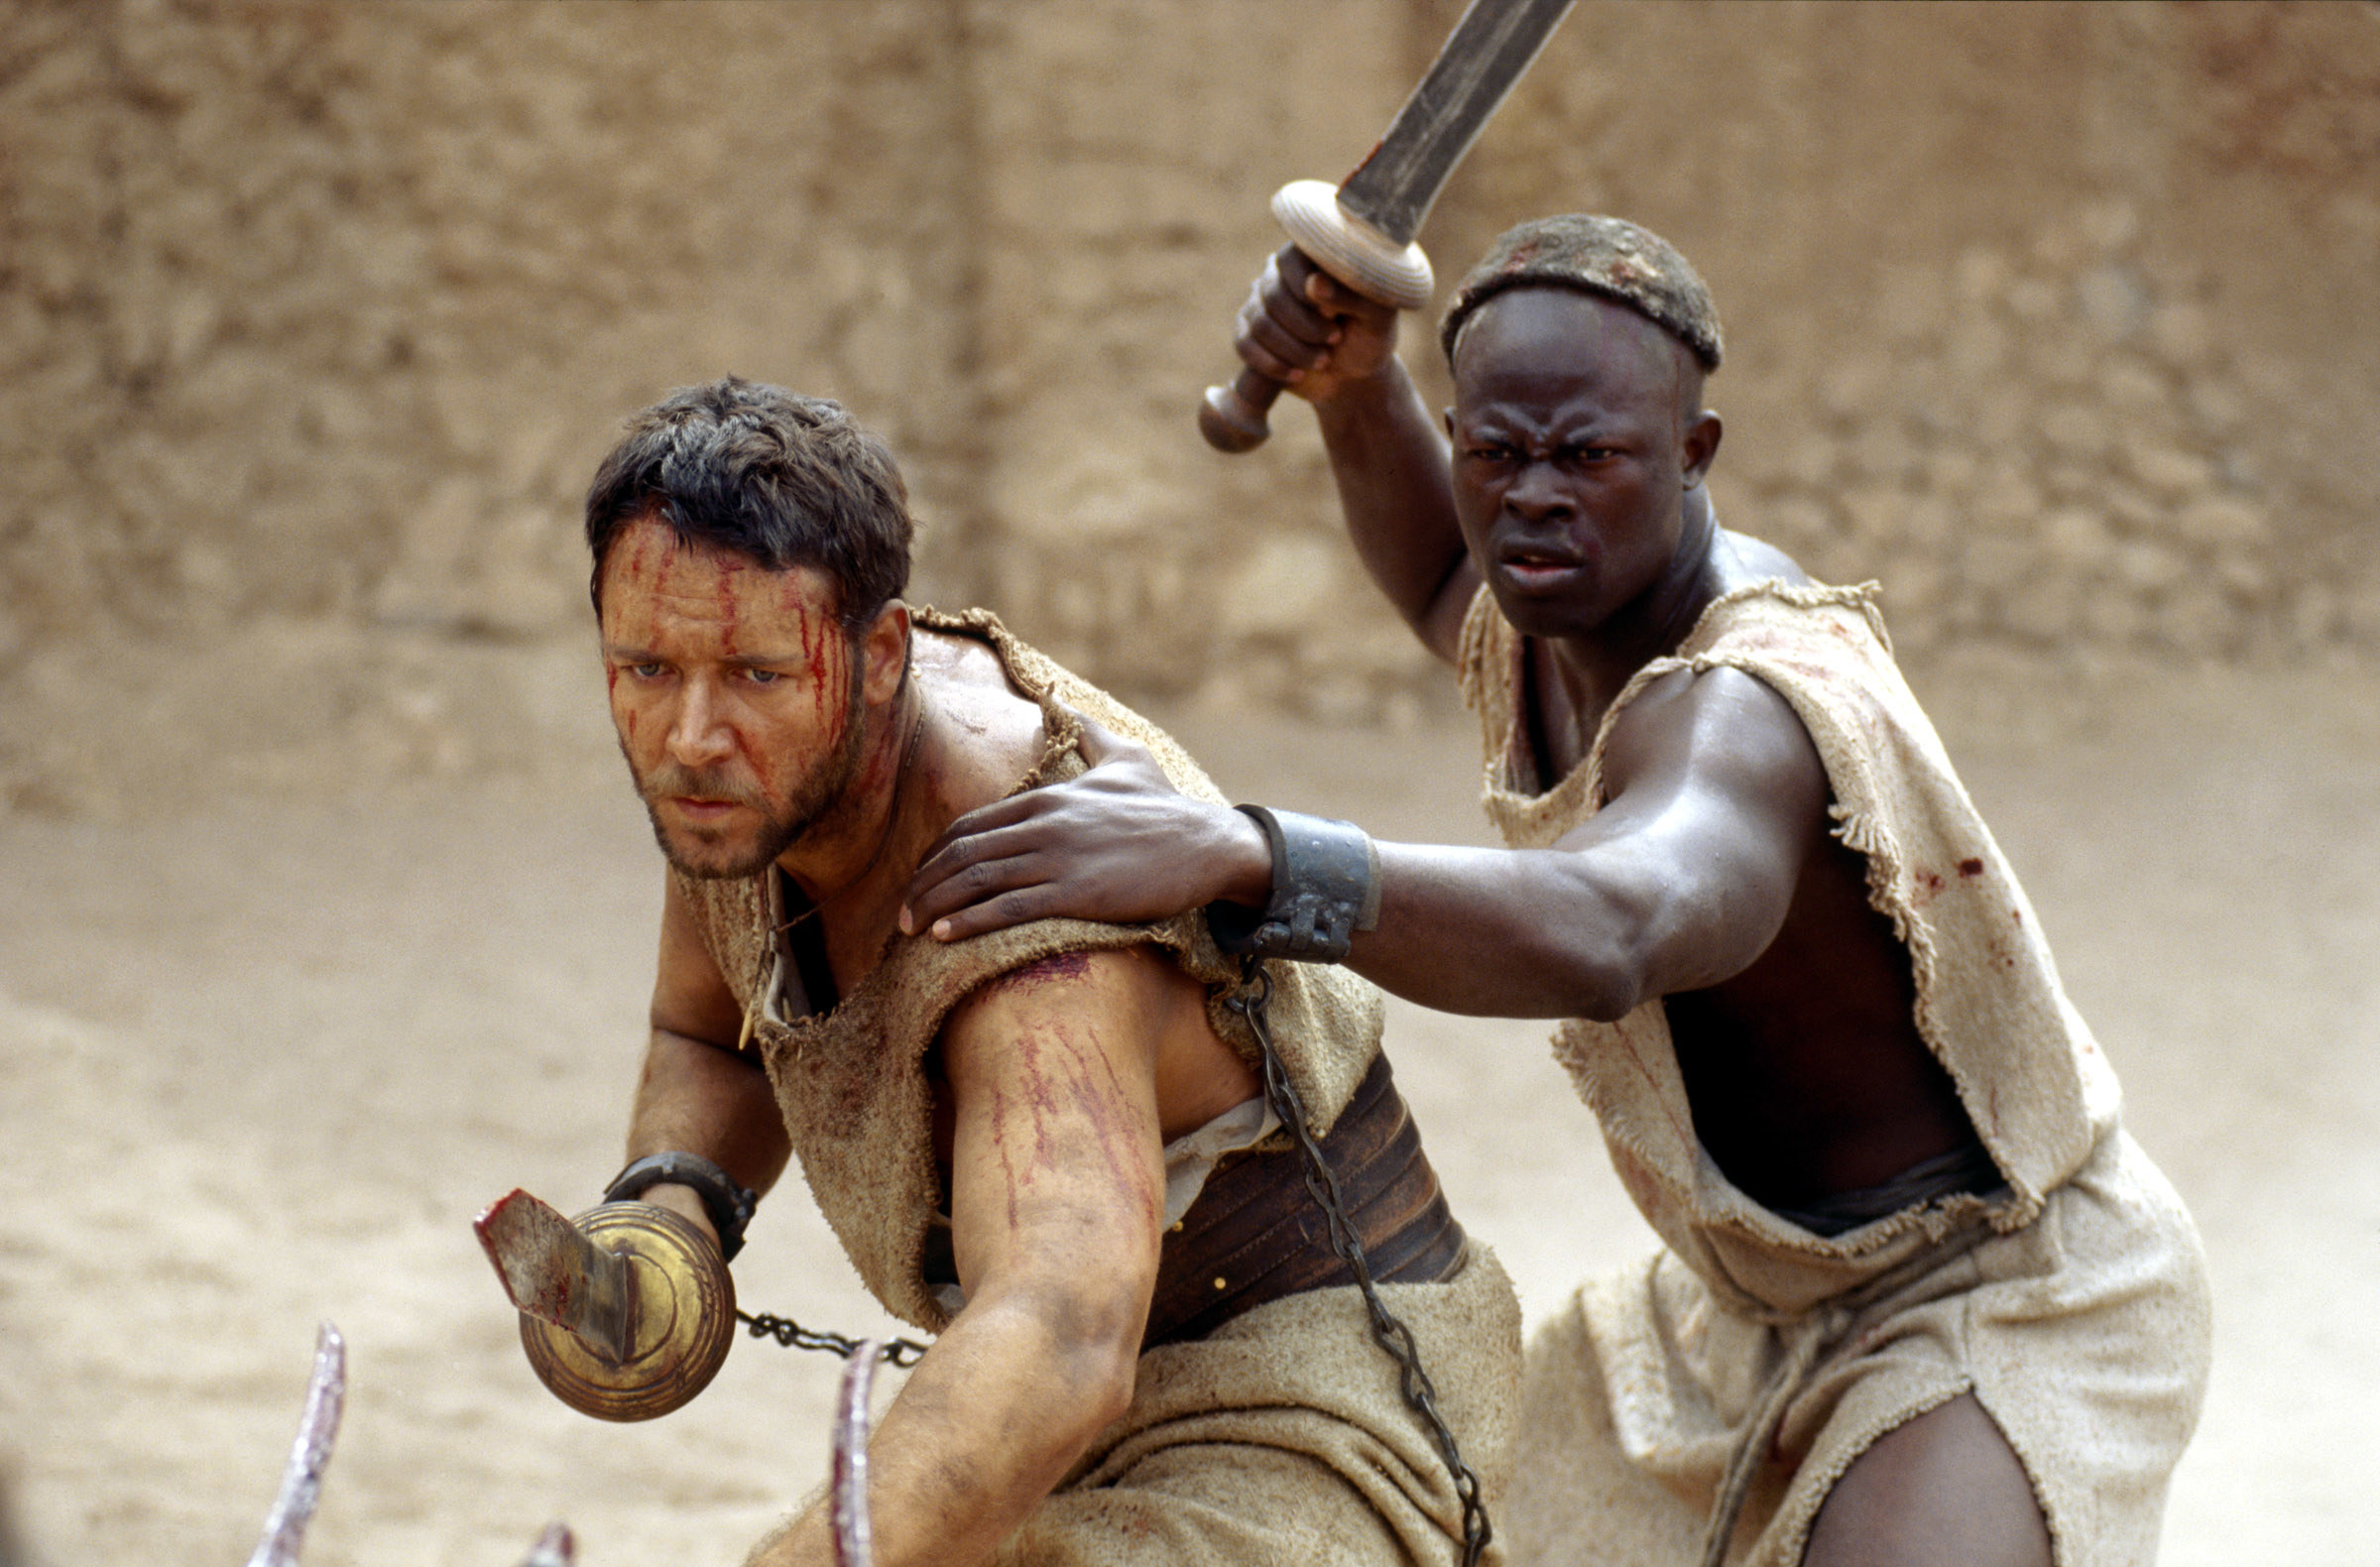 Russell Crowe and Djimon Hounsou fight in a pit together